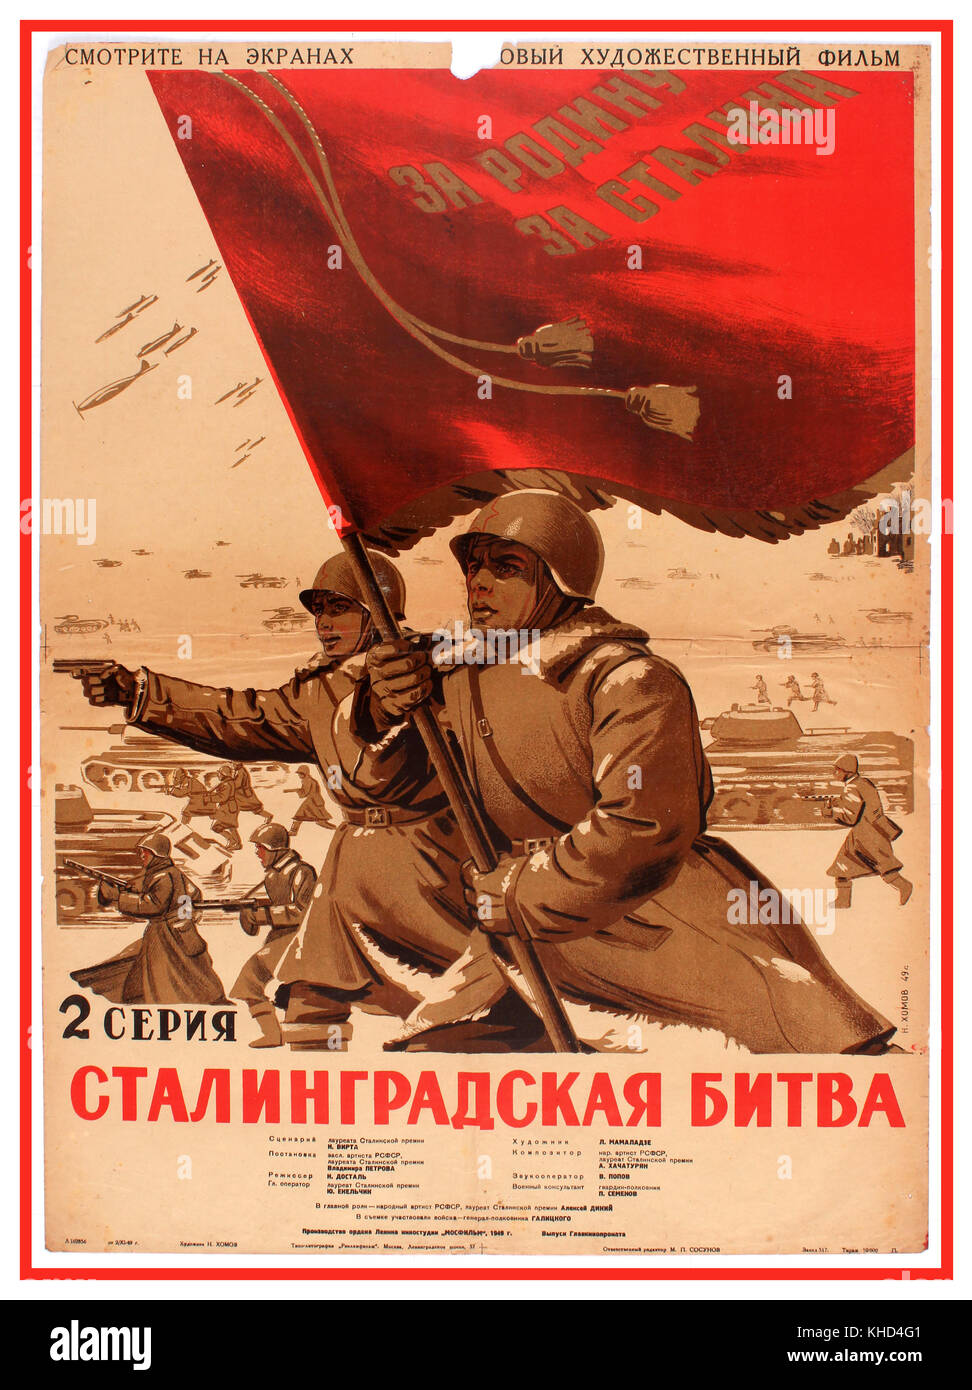 World War 2 Russian Soviet Propaganda Film Poster - 'Battle of Stalingrad'. The Battle of Stalingrad is a 1949 two-part Soviet epic war film about the Battle of Stalingrad, directed by Vladimir Petrov. The script by Nikolai Virta. Country: Russia. Year: 1949. Artist: N. Homov. Stock Photo